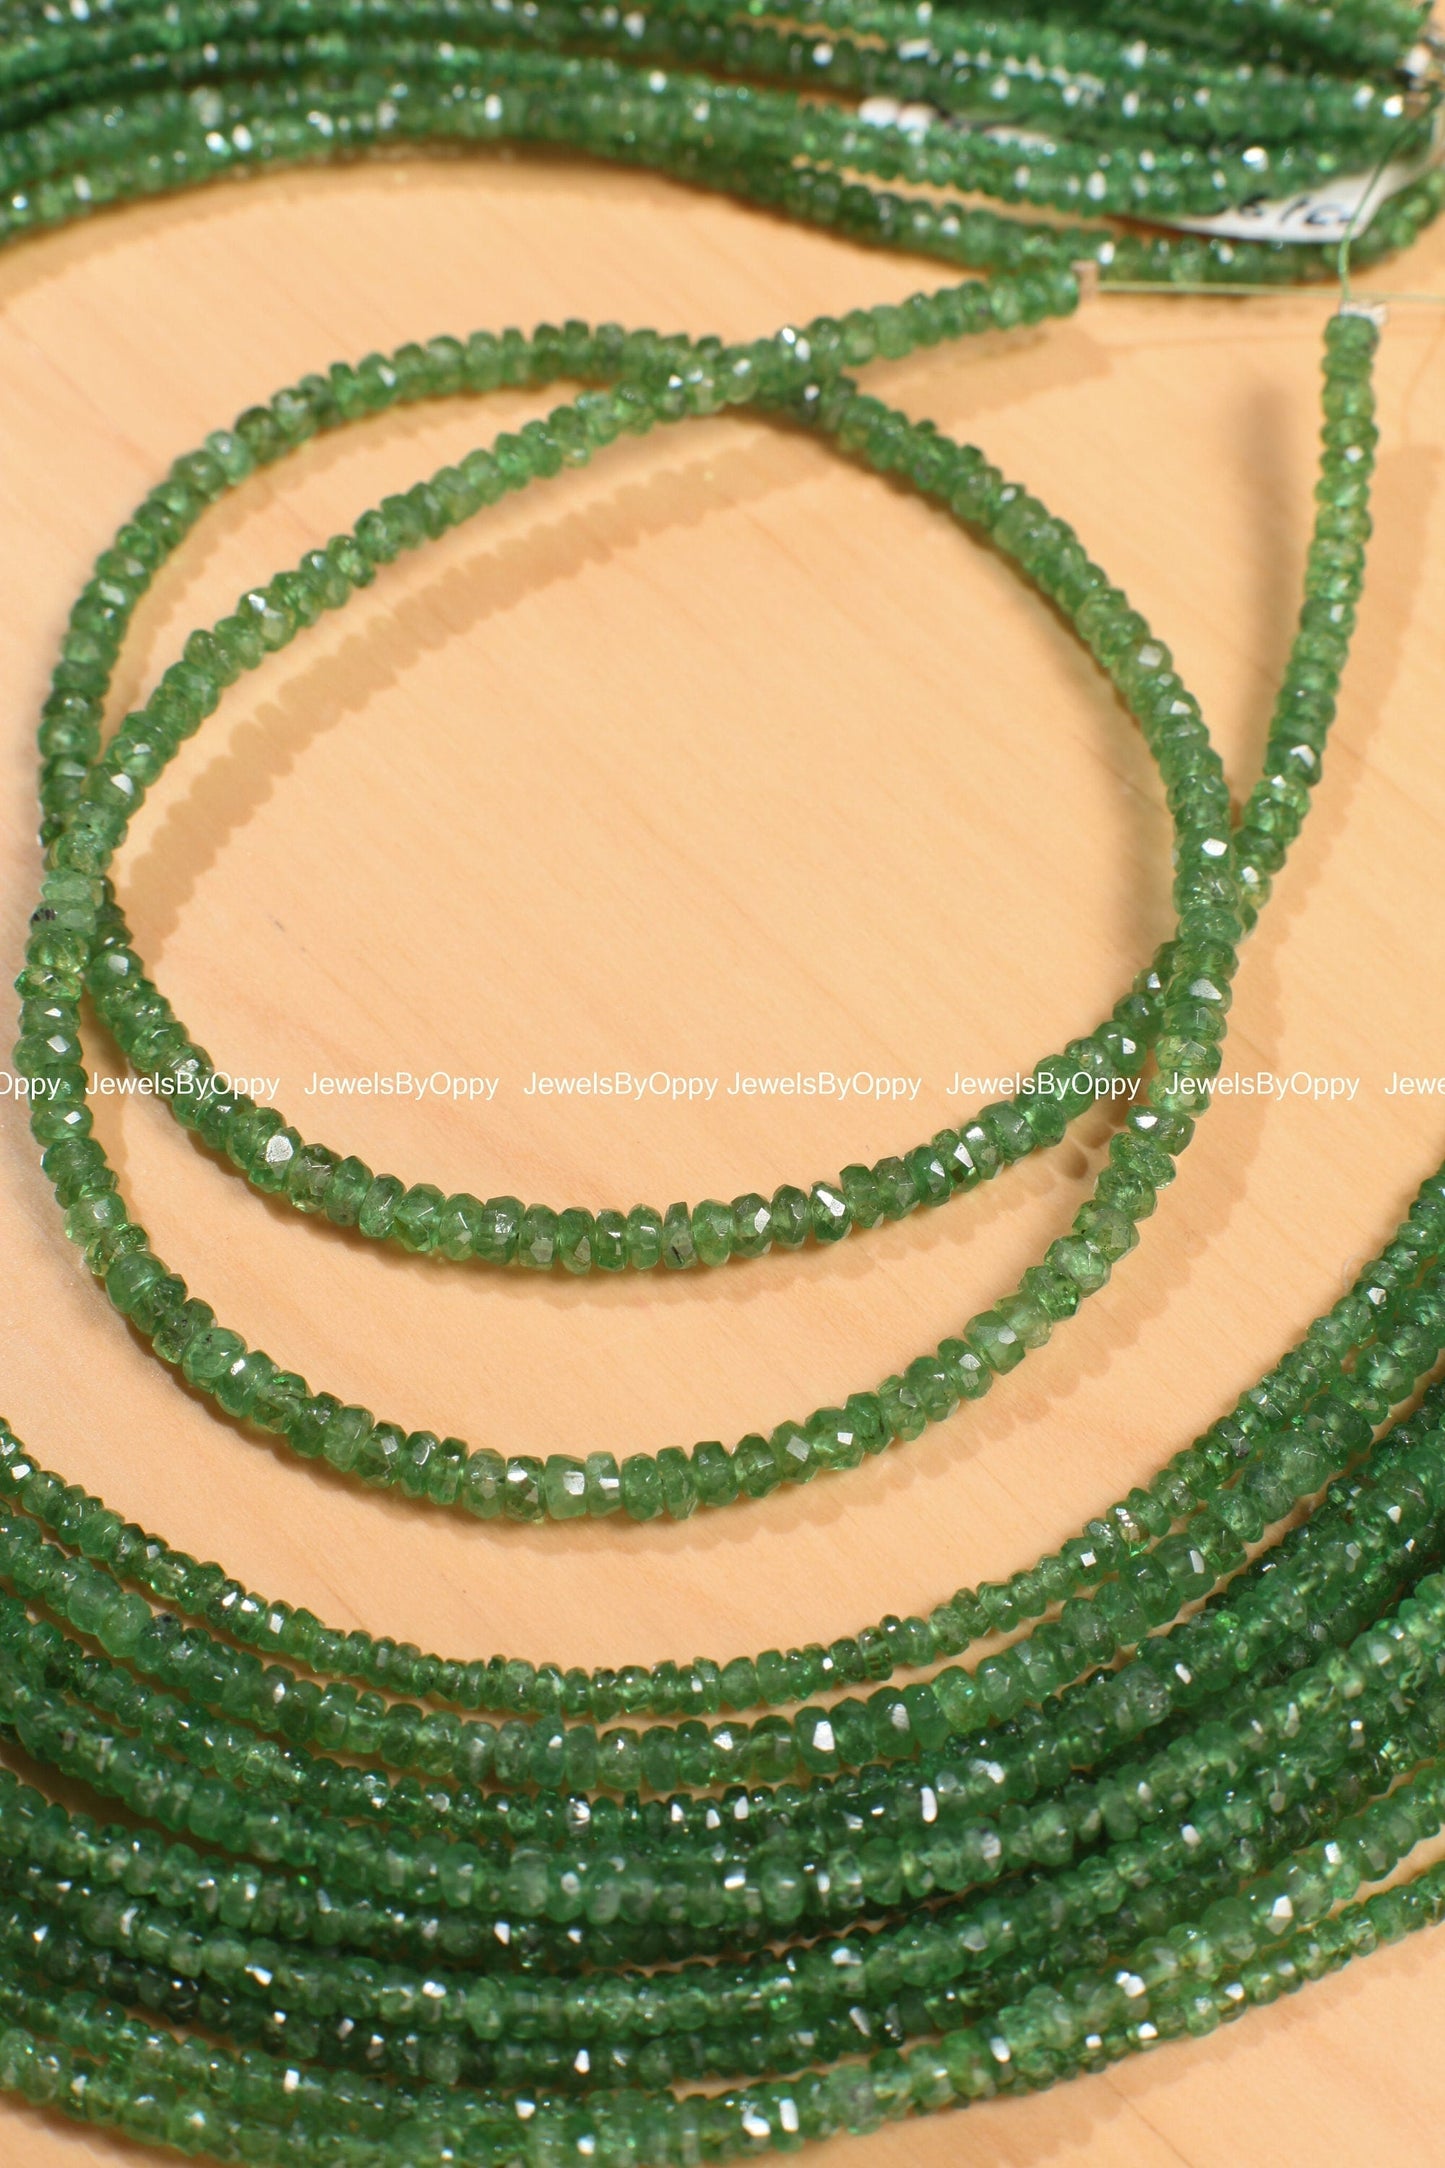 Natural Tsavorite 2.5-3.5mm Micro Faceted Rondelle Jewelry Making Gemstone Necklace, Bracelet, Earrings beads